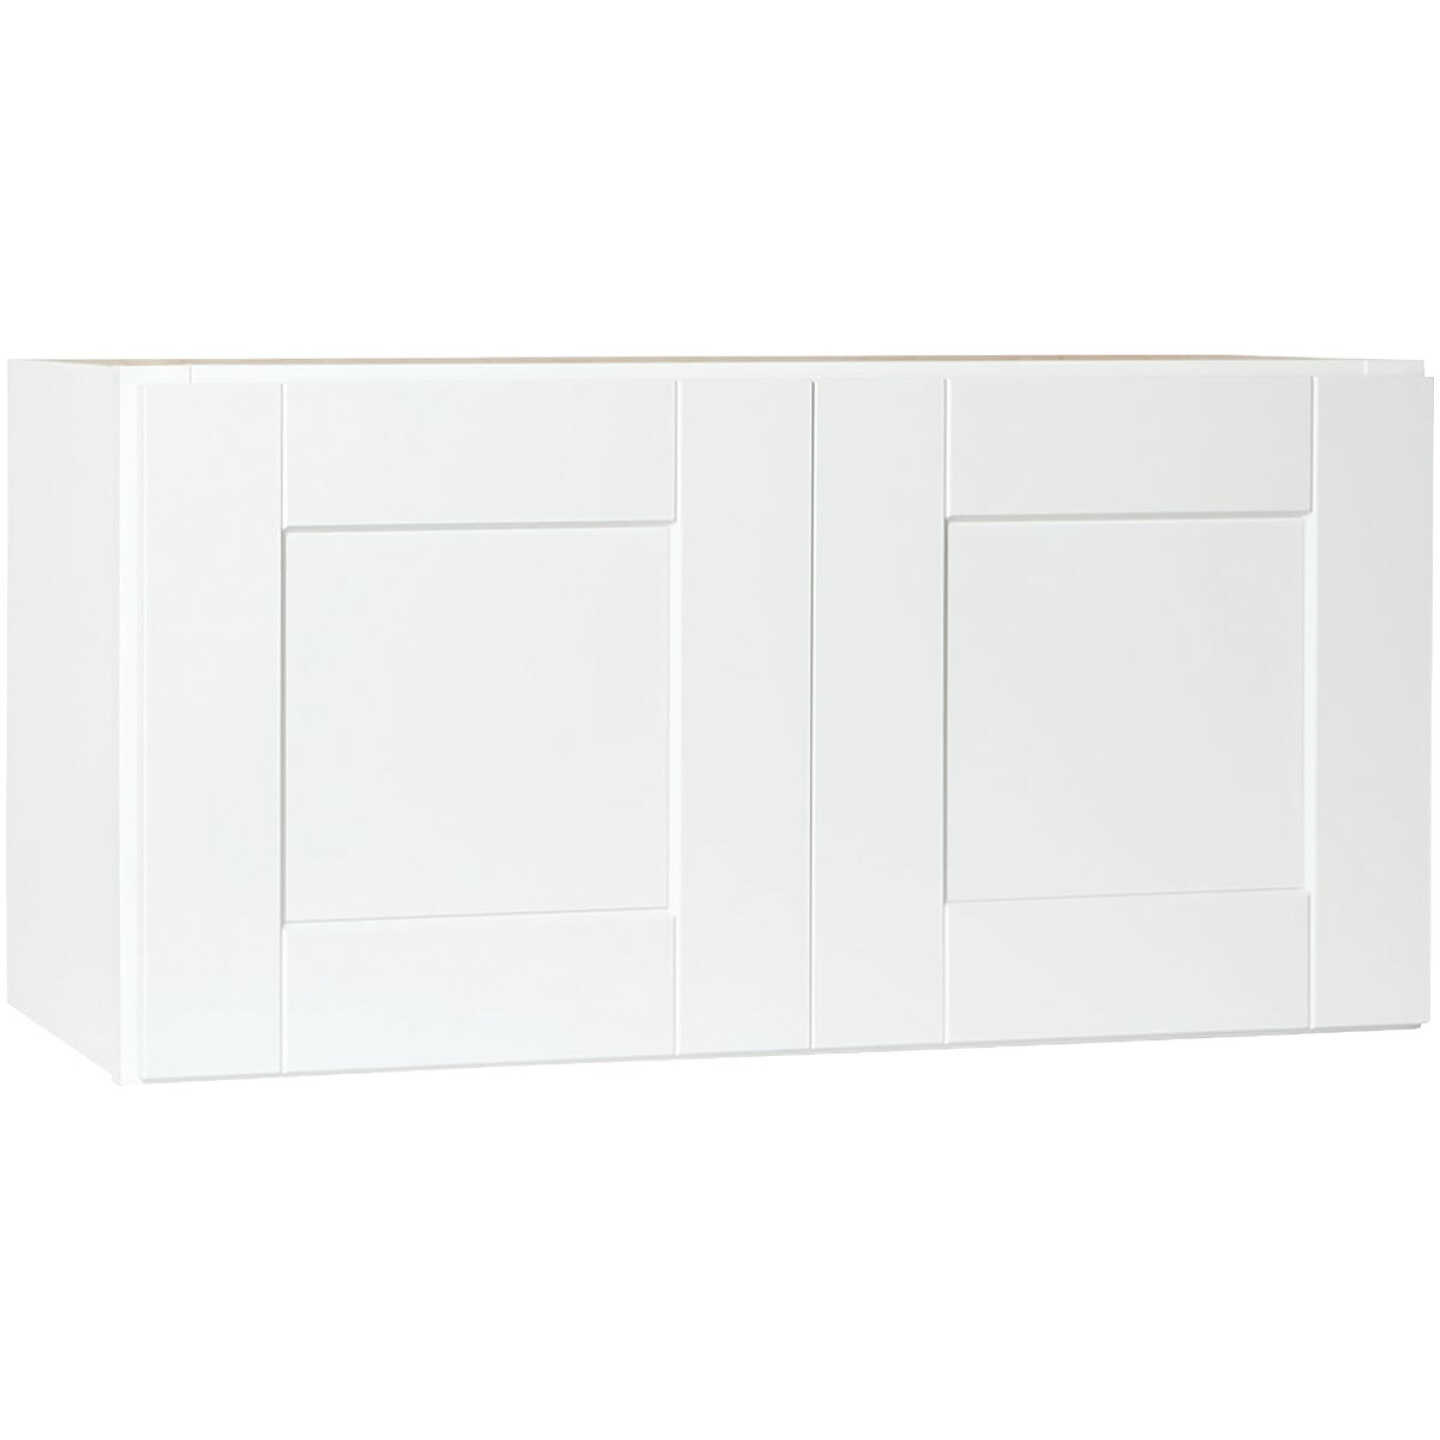 Continental Cabinets Andover Shaker 30 In. W x 15 In. H x 12 In. D White Thermofoil Bridge Wall Kitchen Cabinet Image 1